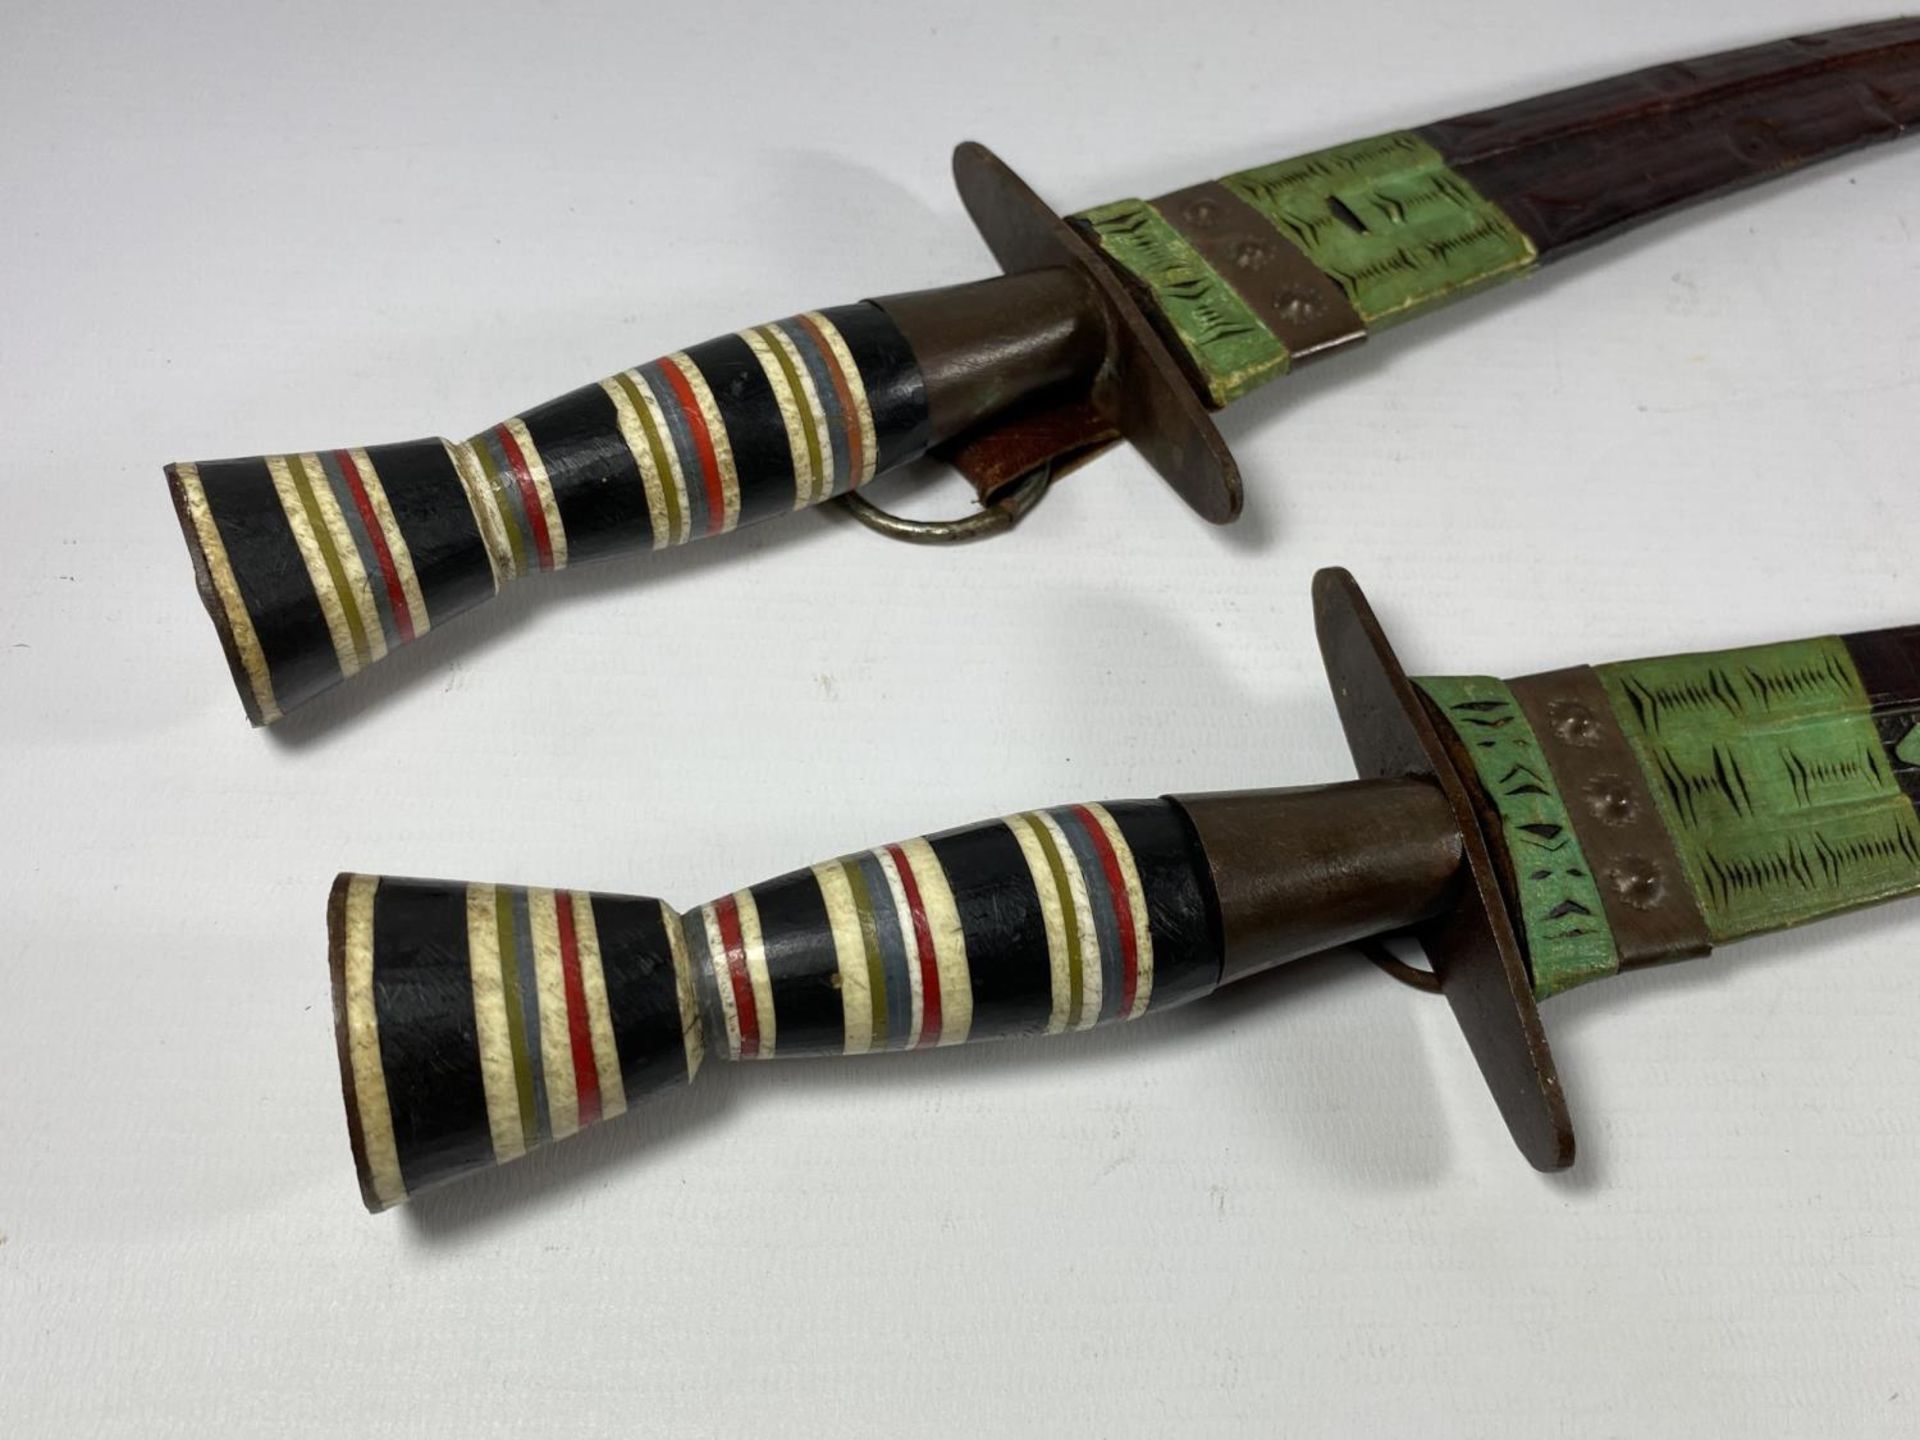 A PAIR OF EGYPTIAN / MIDDLE EASTERN CEREMONIAL DAGGERS - Image 2 of 4